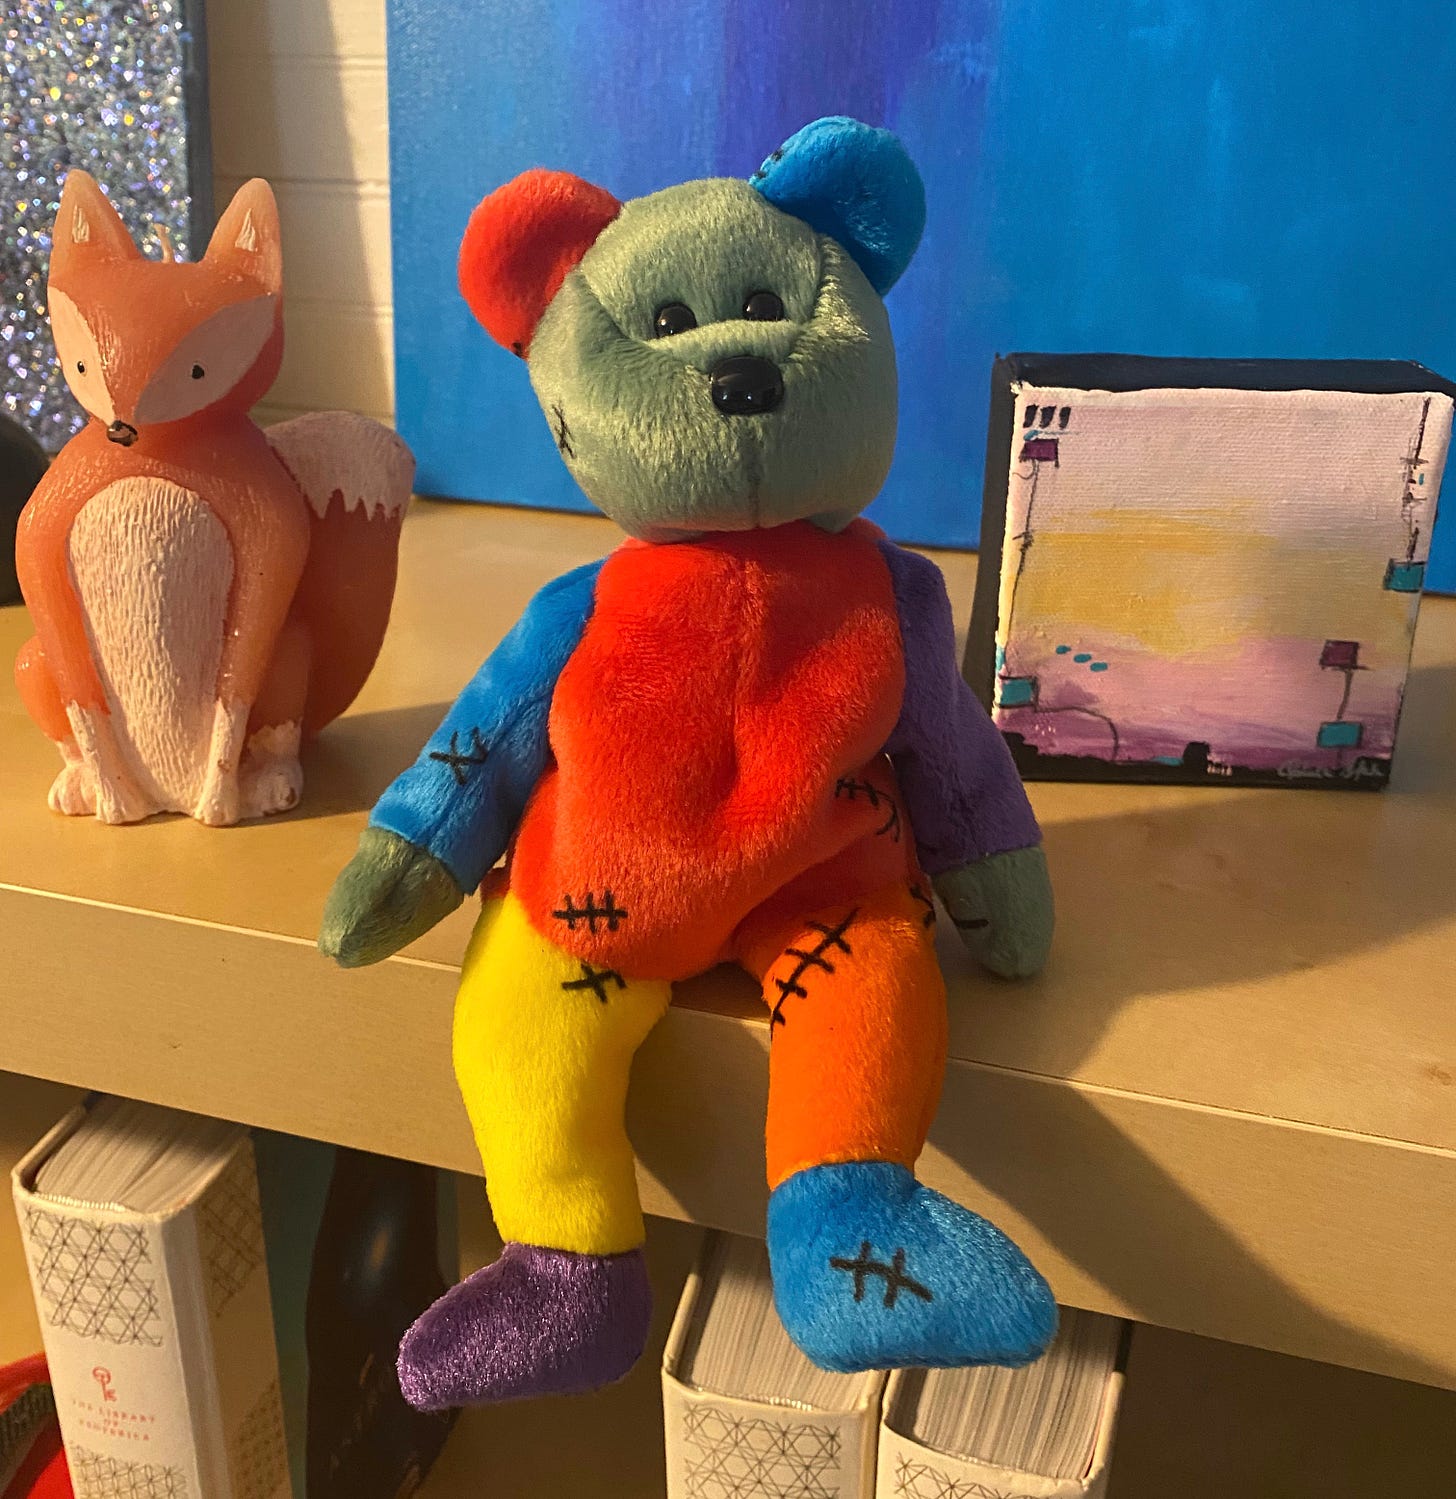 Frankenstein-themed Beanie Babie sitting on a shelf with a wax fox and small purple painting behind it.